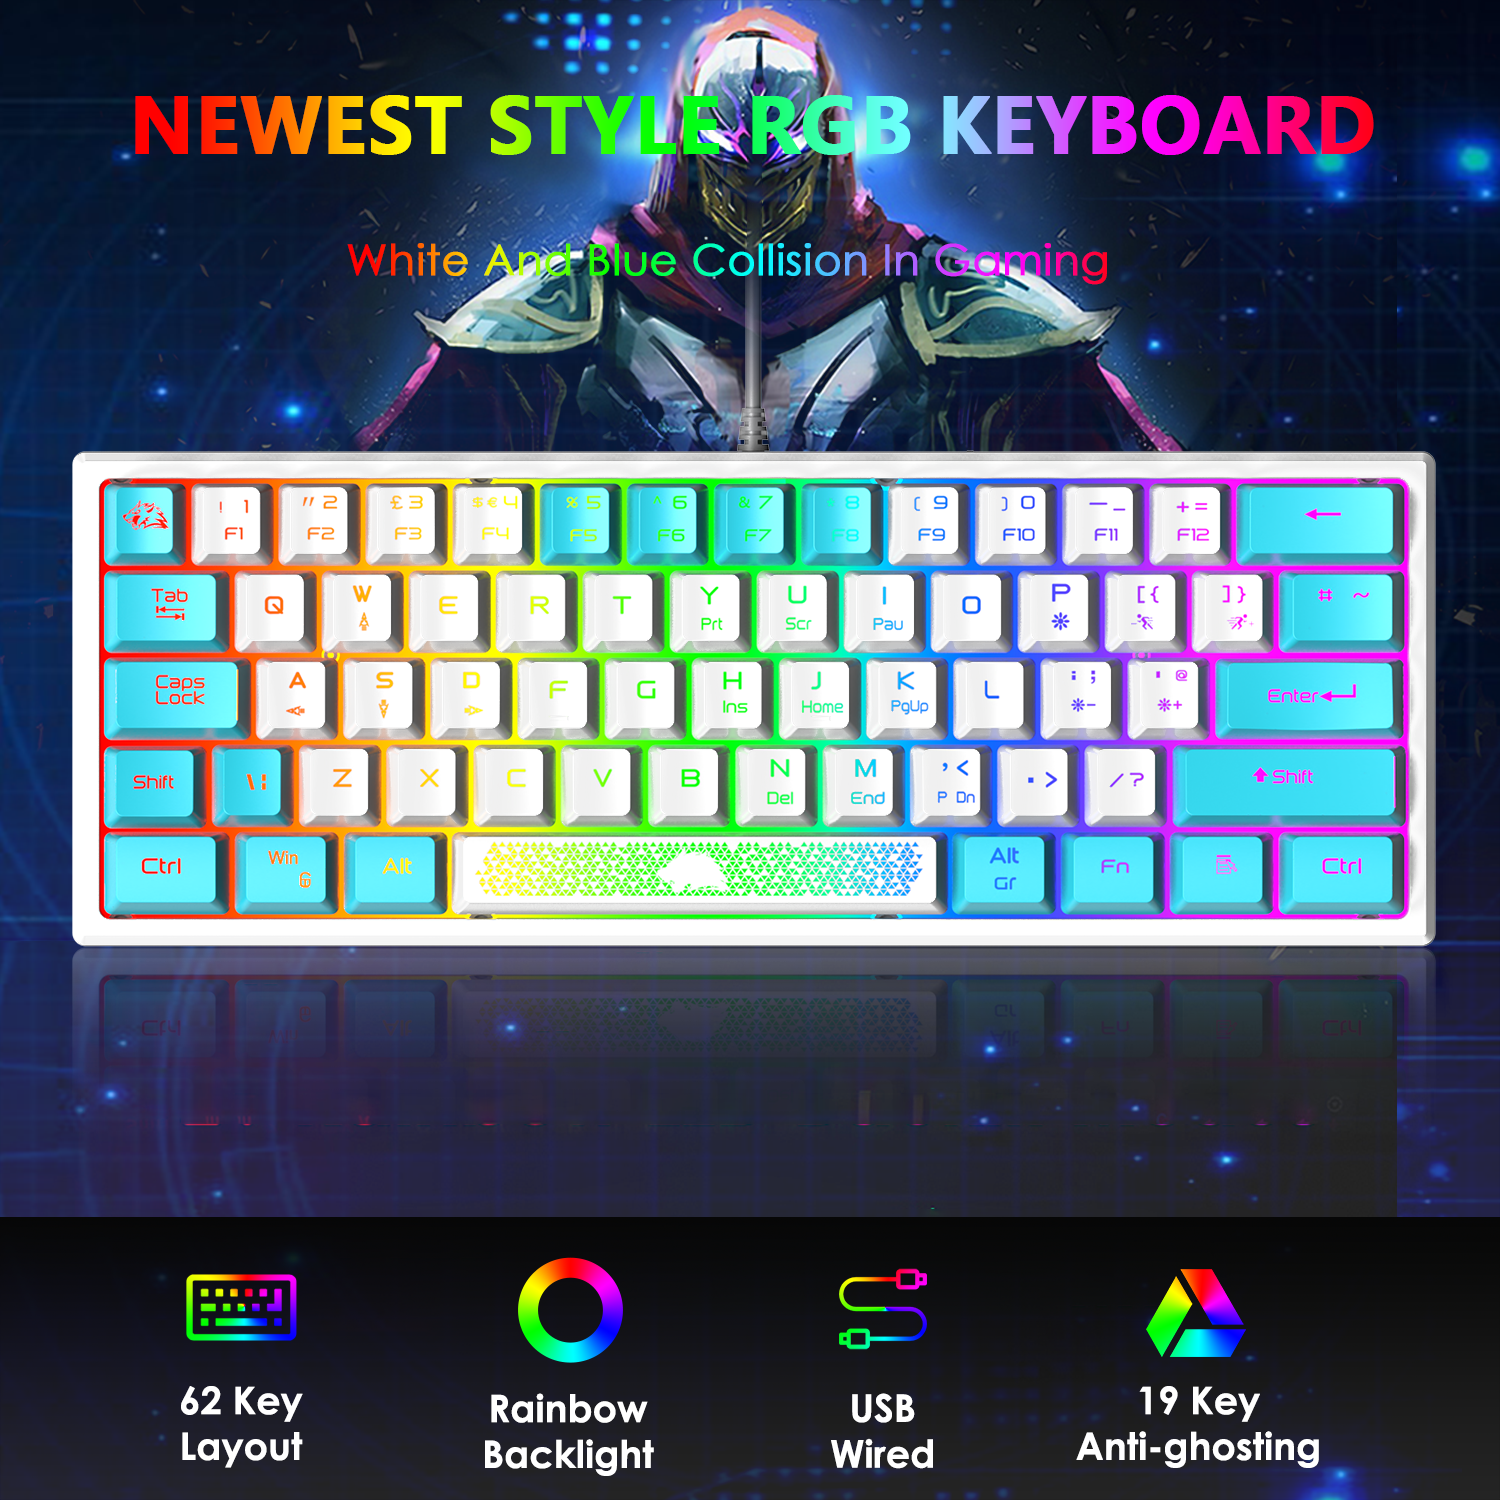 ZIYOU LANG K61 - 60 Percent Compact Gaming Keyboard UK Layout Ultralight LED Backlit Mechanical Feel PS4 Laptop PC Accessories